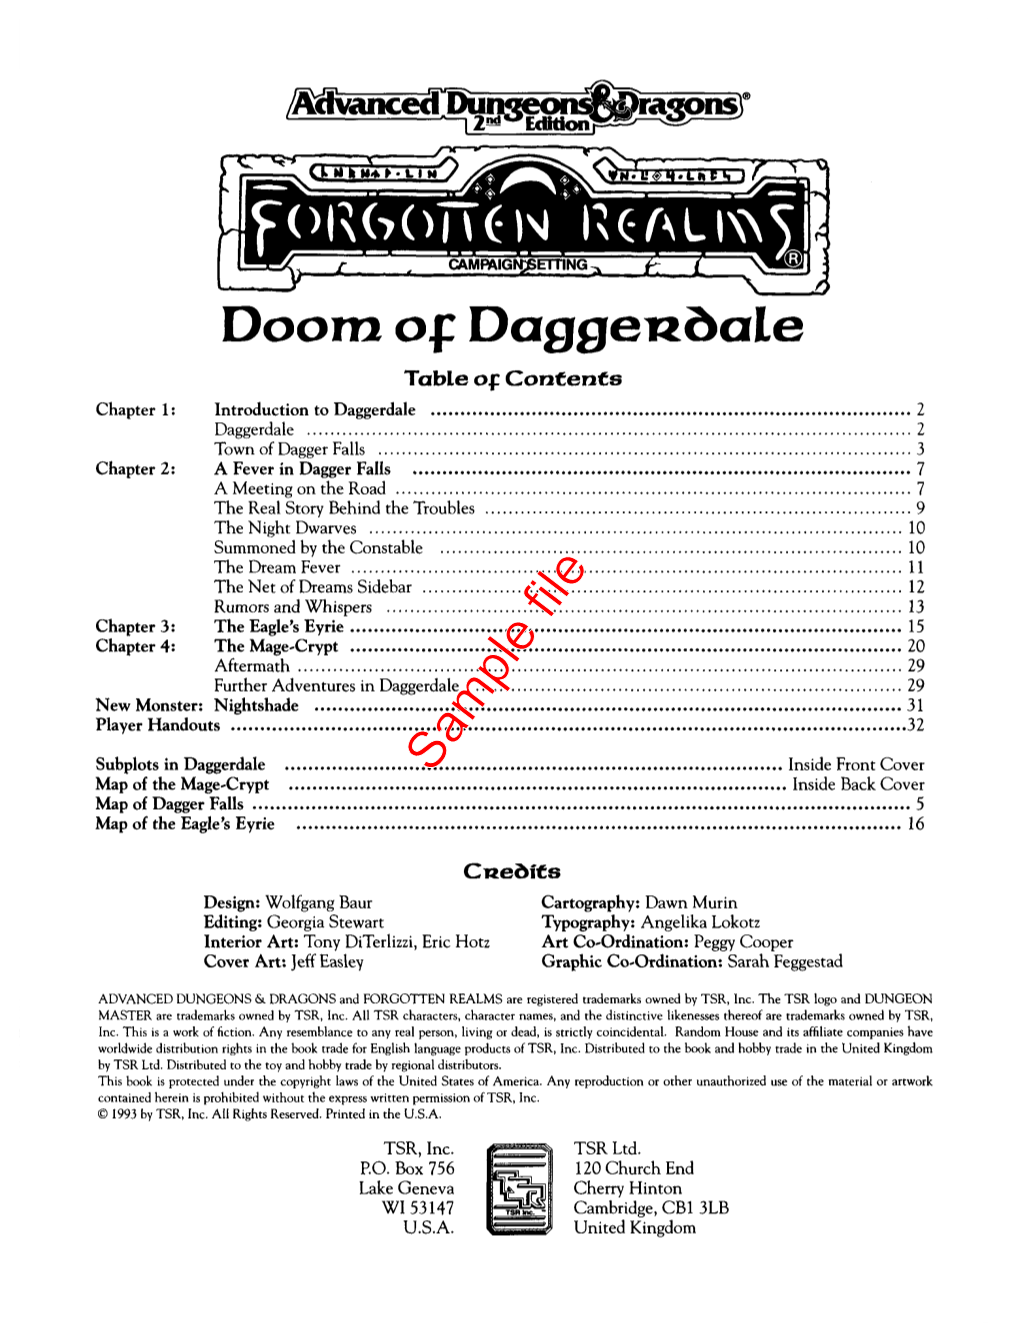 Doom of Daggerdale Includes a Number of Characters and Plots, Not All of Which the Players May Wish to Investigate Right Away